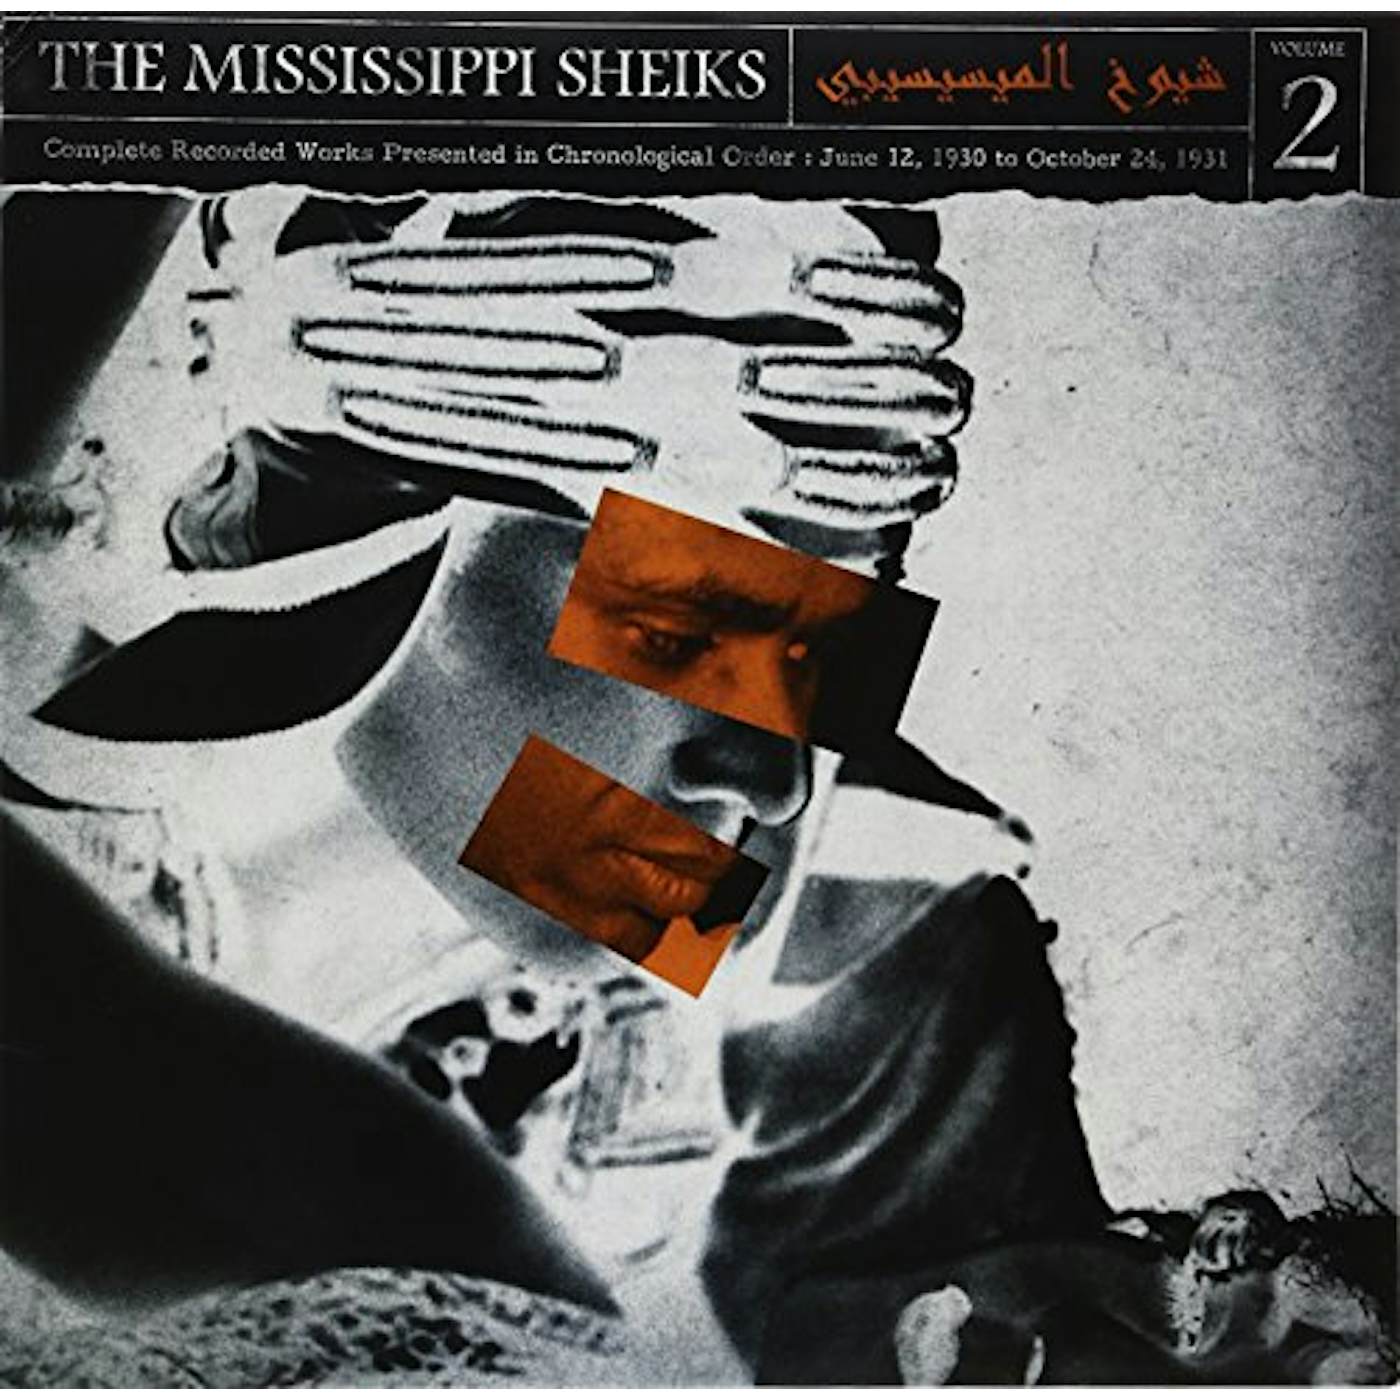 Mississippi Sheiks COMPLETE RECORDED WORKS IN CHRONOLOGICAL ORDER 2 Vinyl Record